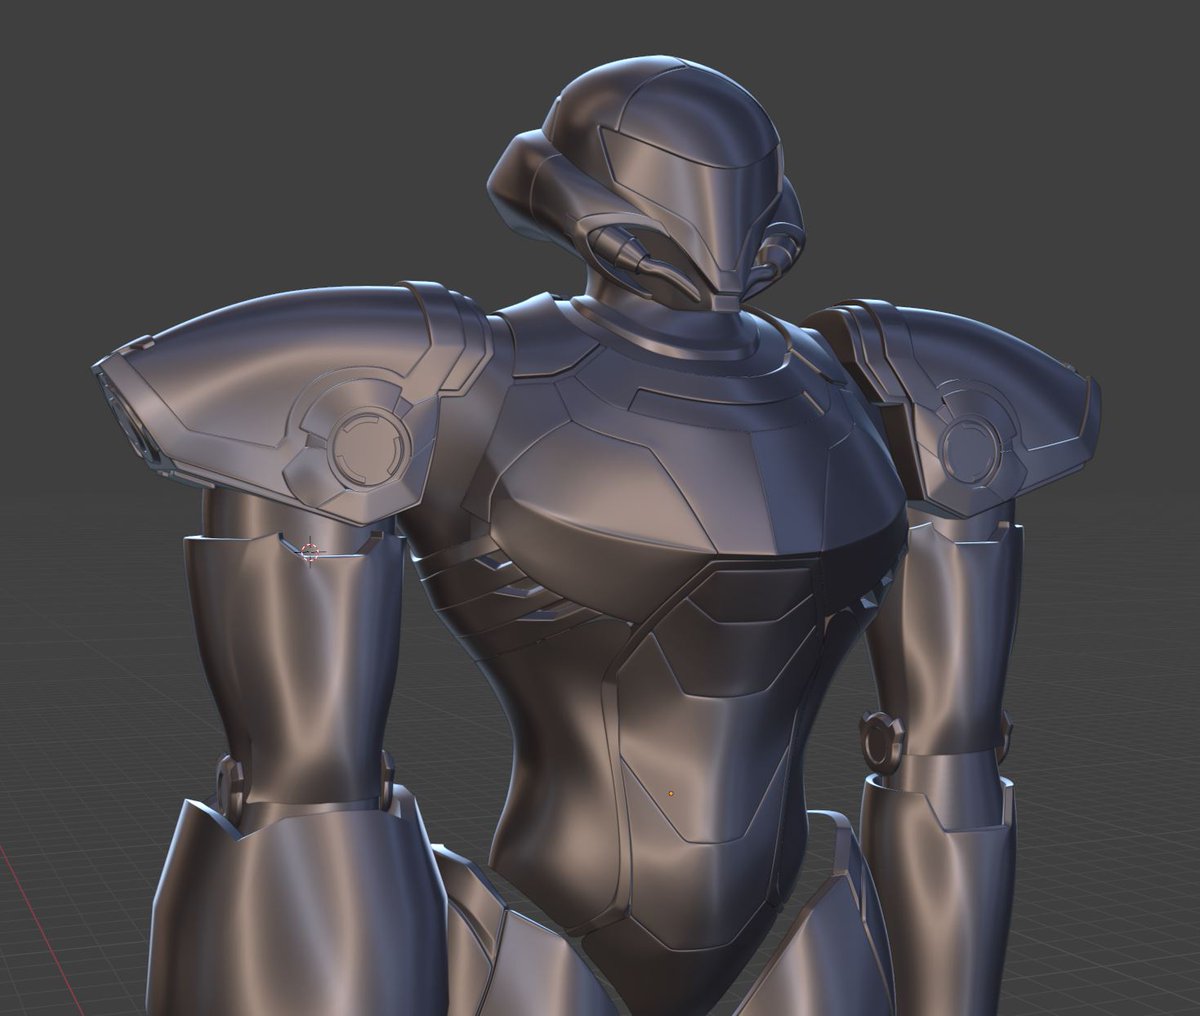 Finally getting around to detailing the middle of the suit!
@Phazon_Star #Metroid #Nintendo #Samus #fanart #b3d